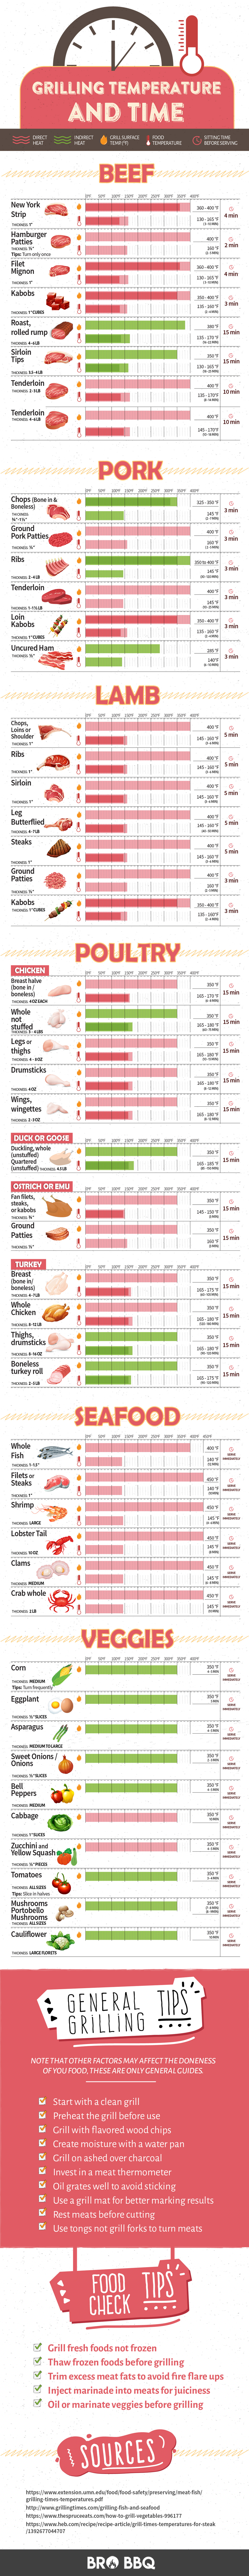 Grilling Time and Temperature Infographic: Courtesy of Jack Thompson